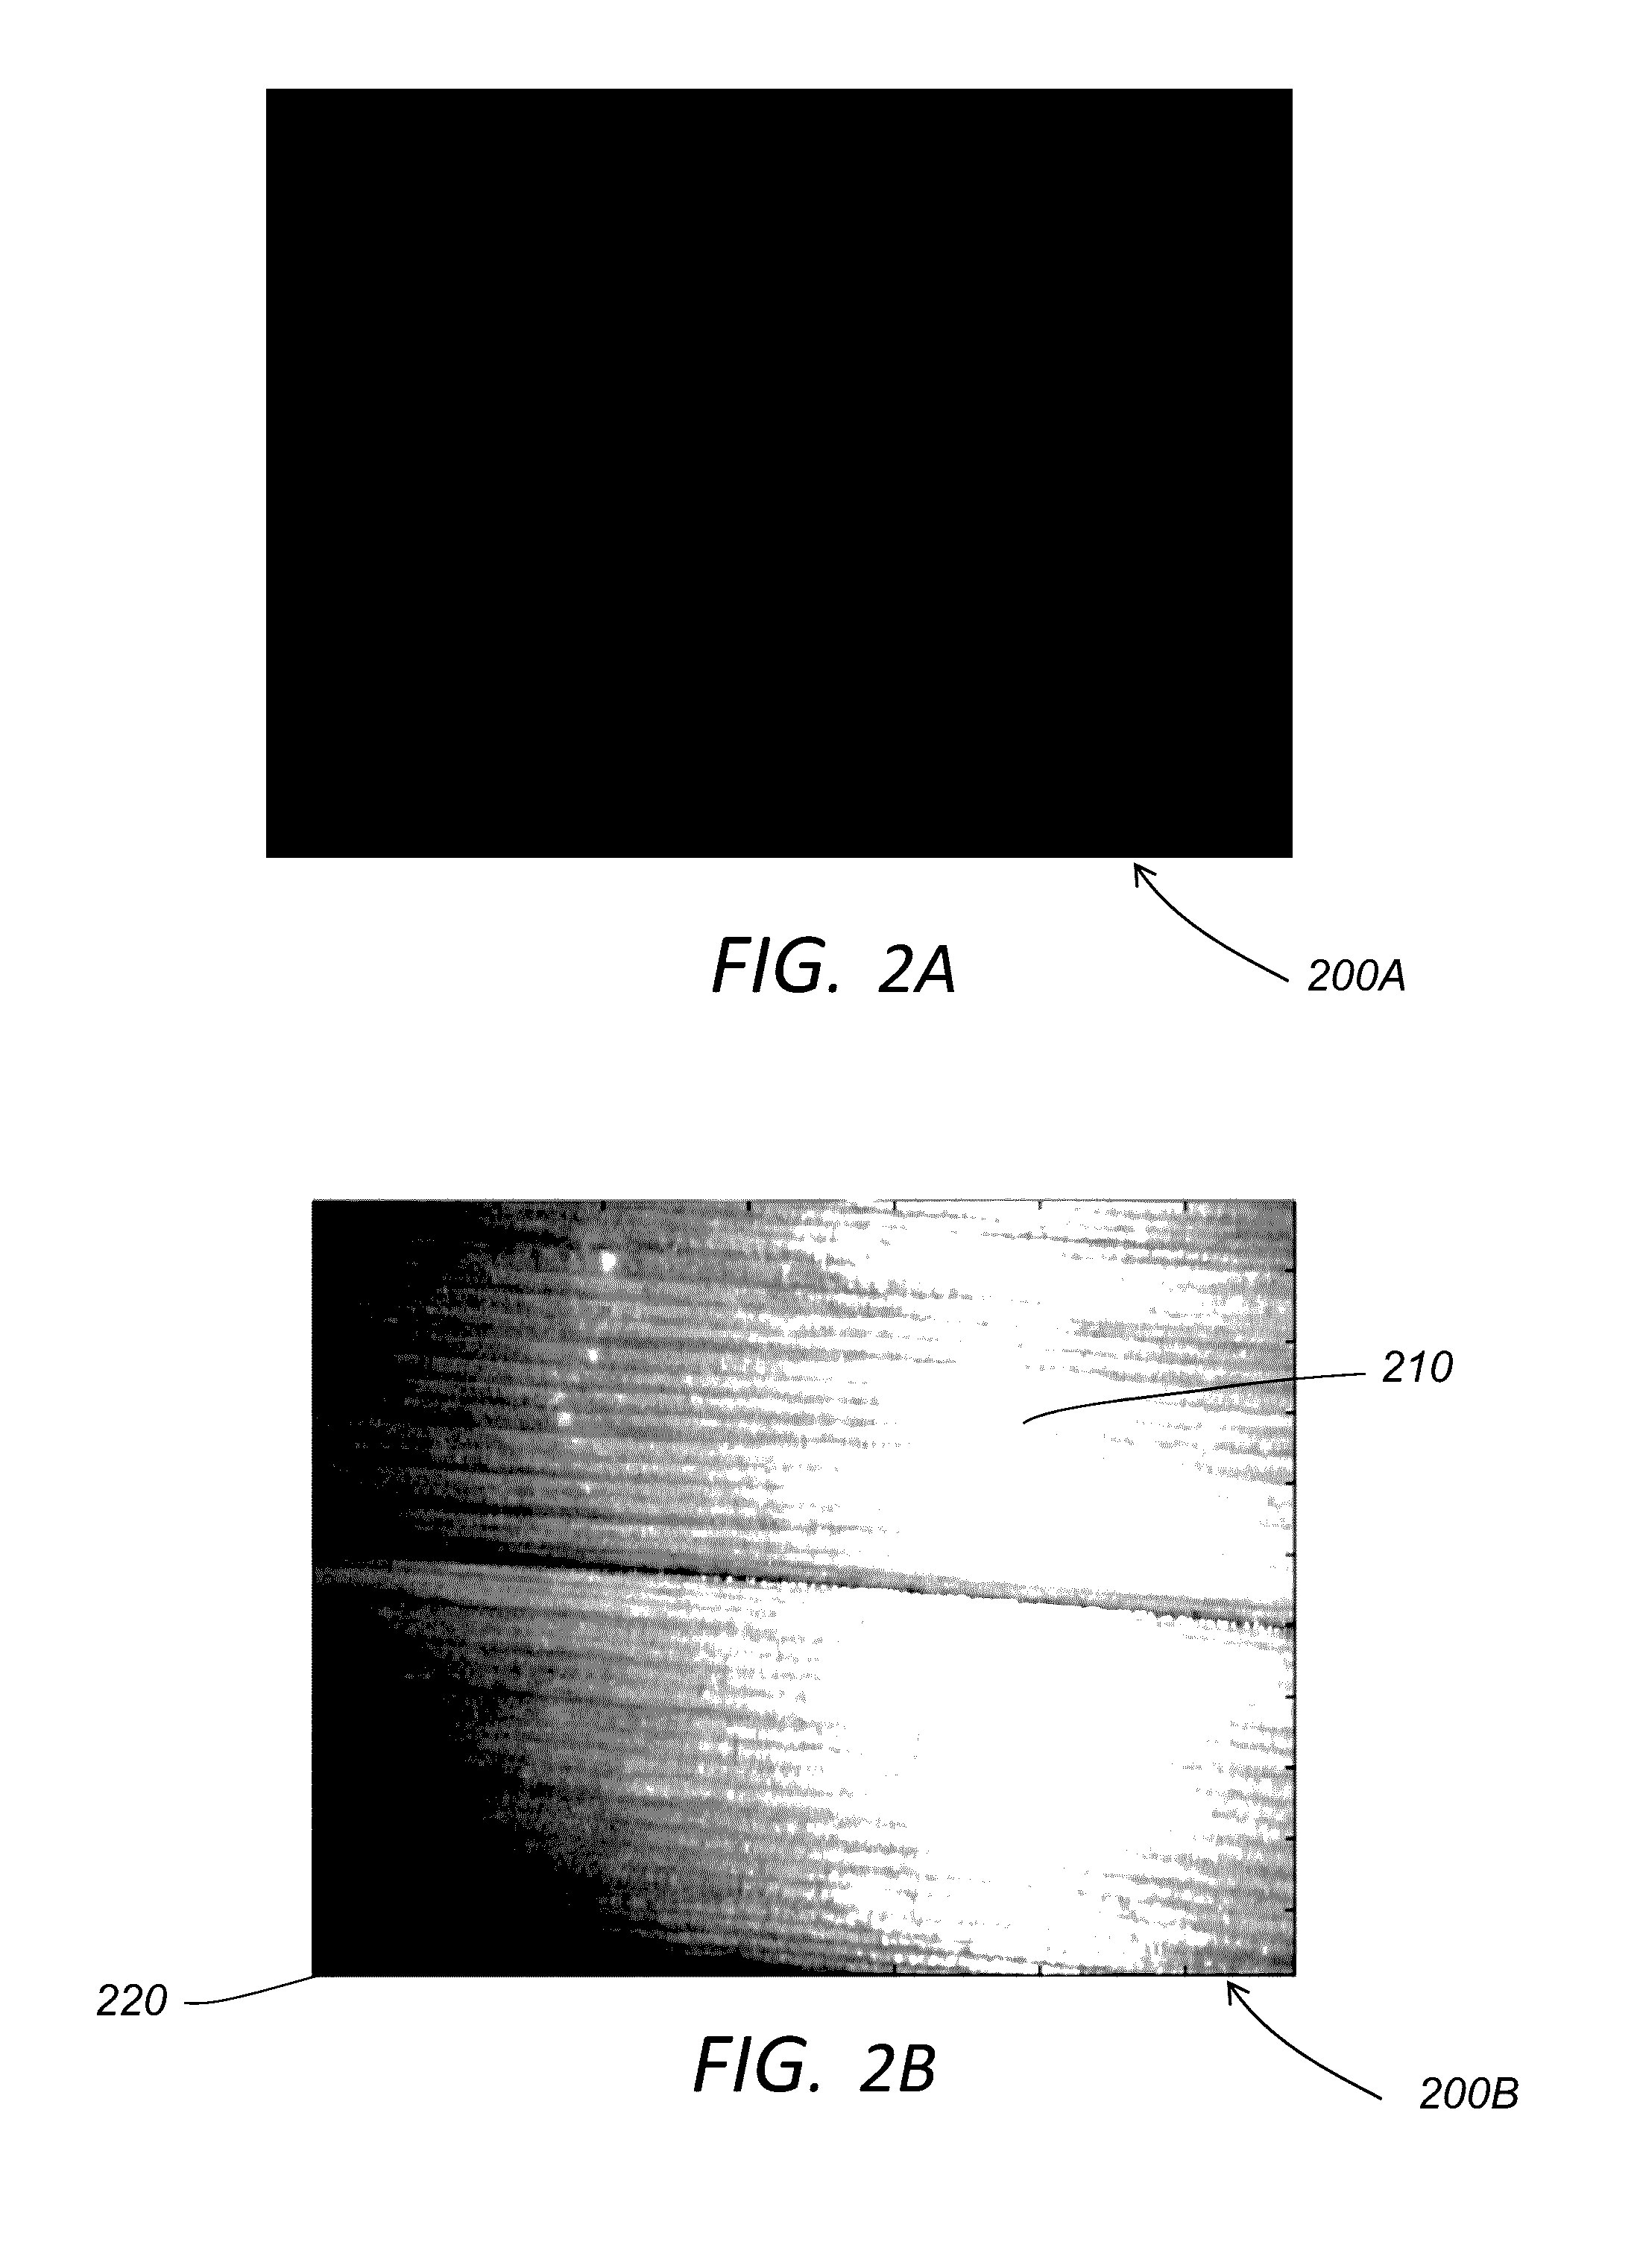 Apparatus and processes for photosynthetic activity measurement and mapping